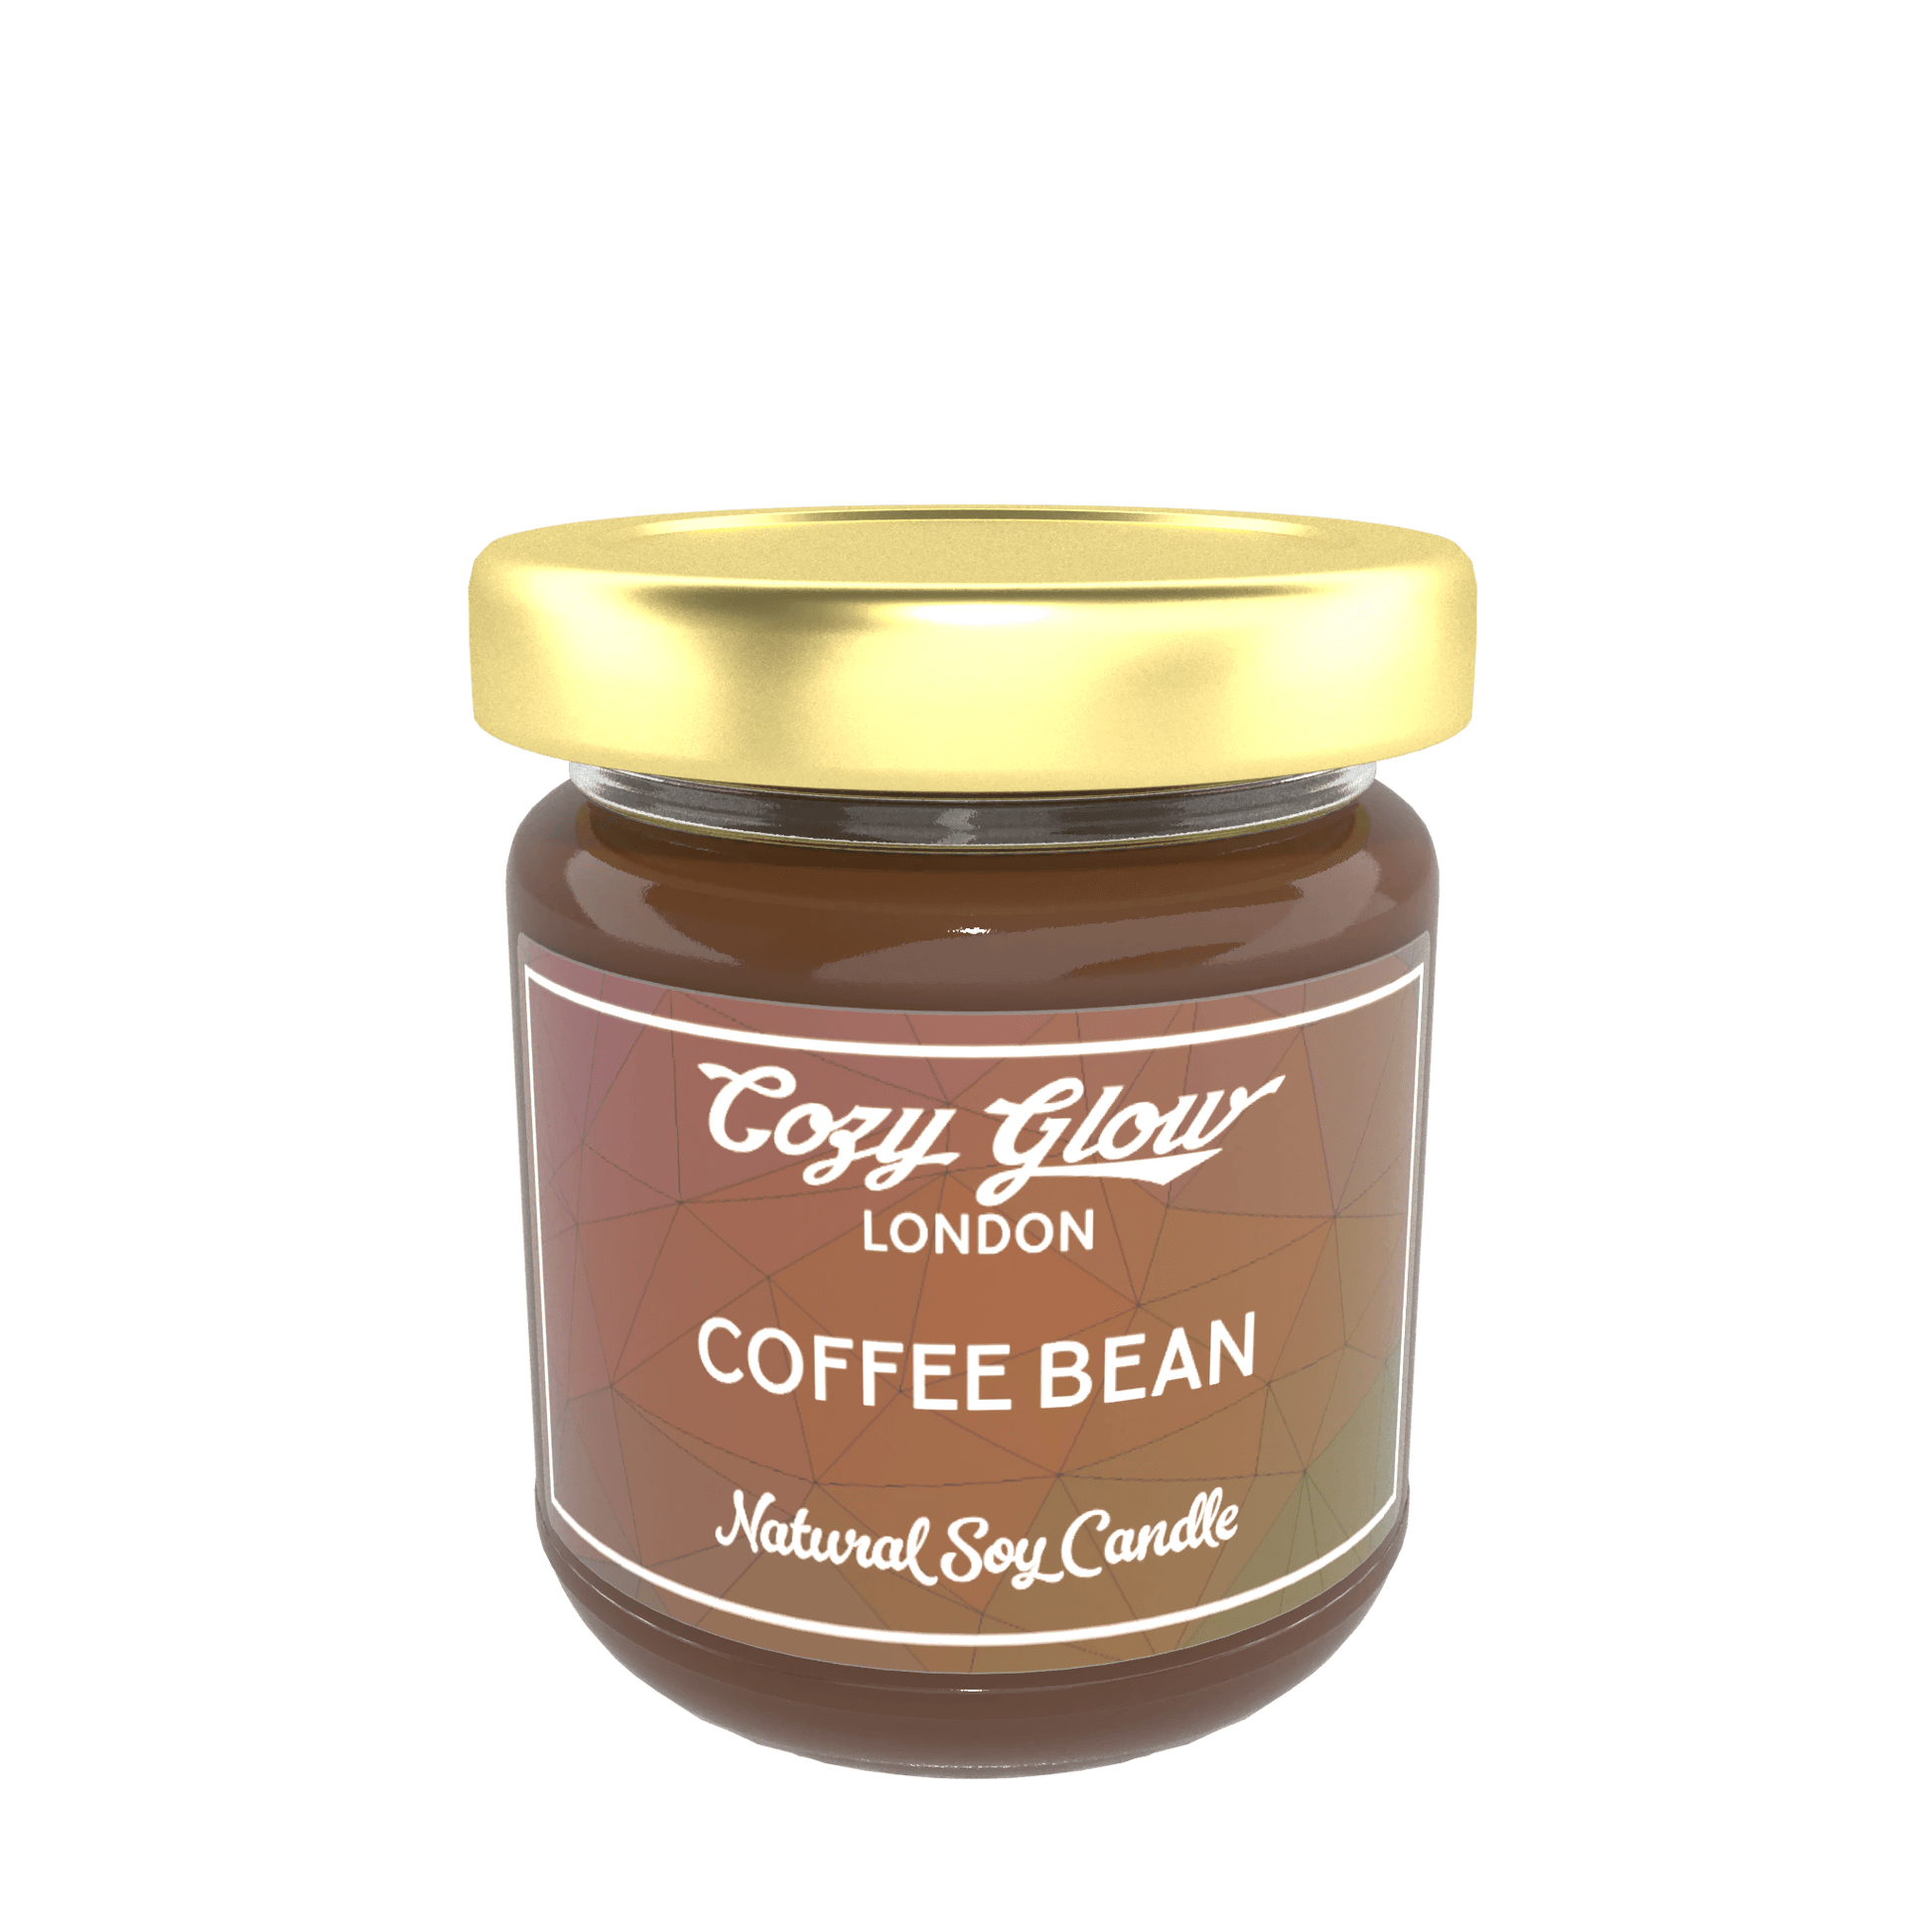 Cozy Glow Coffee Bean Regular Soy Candle